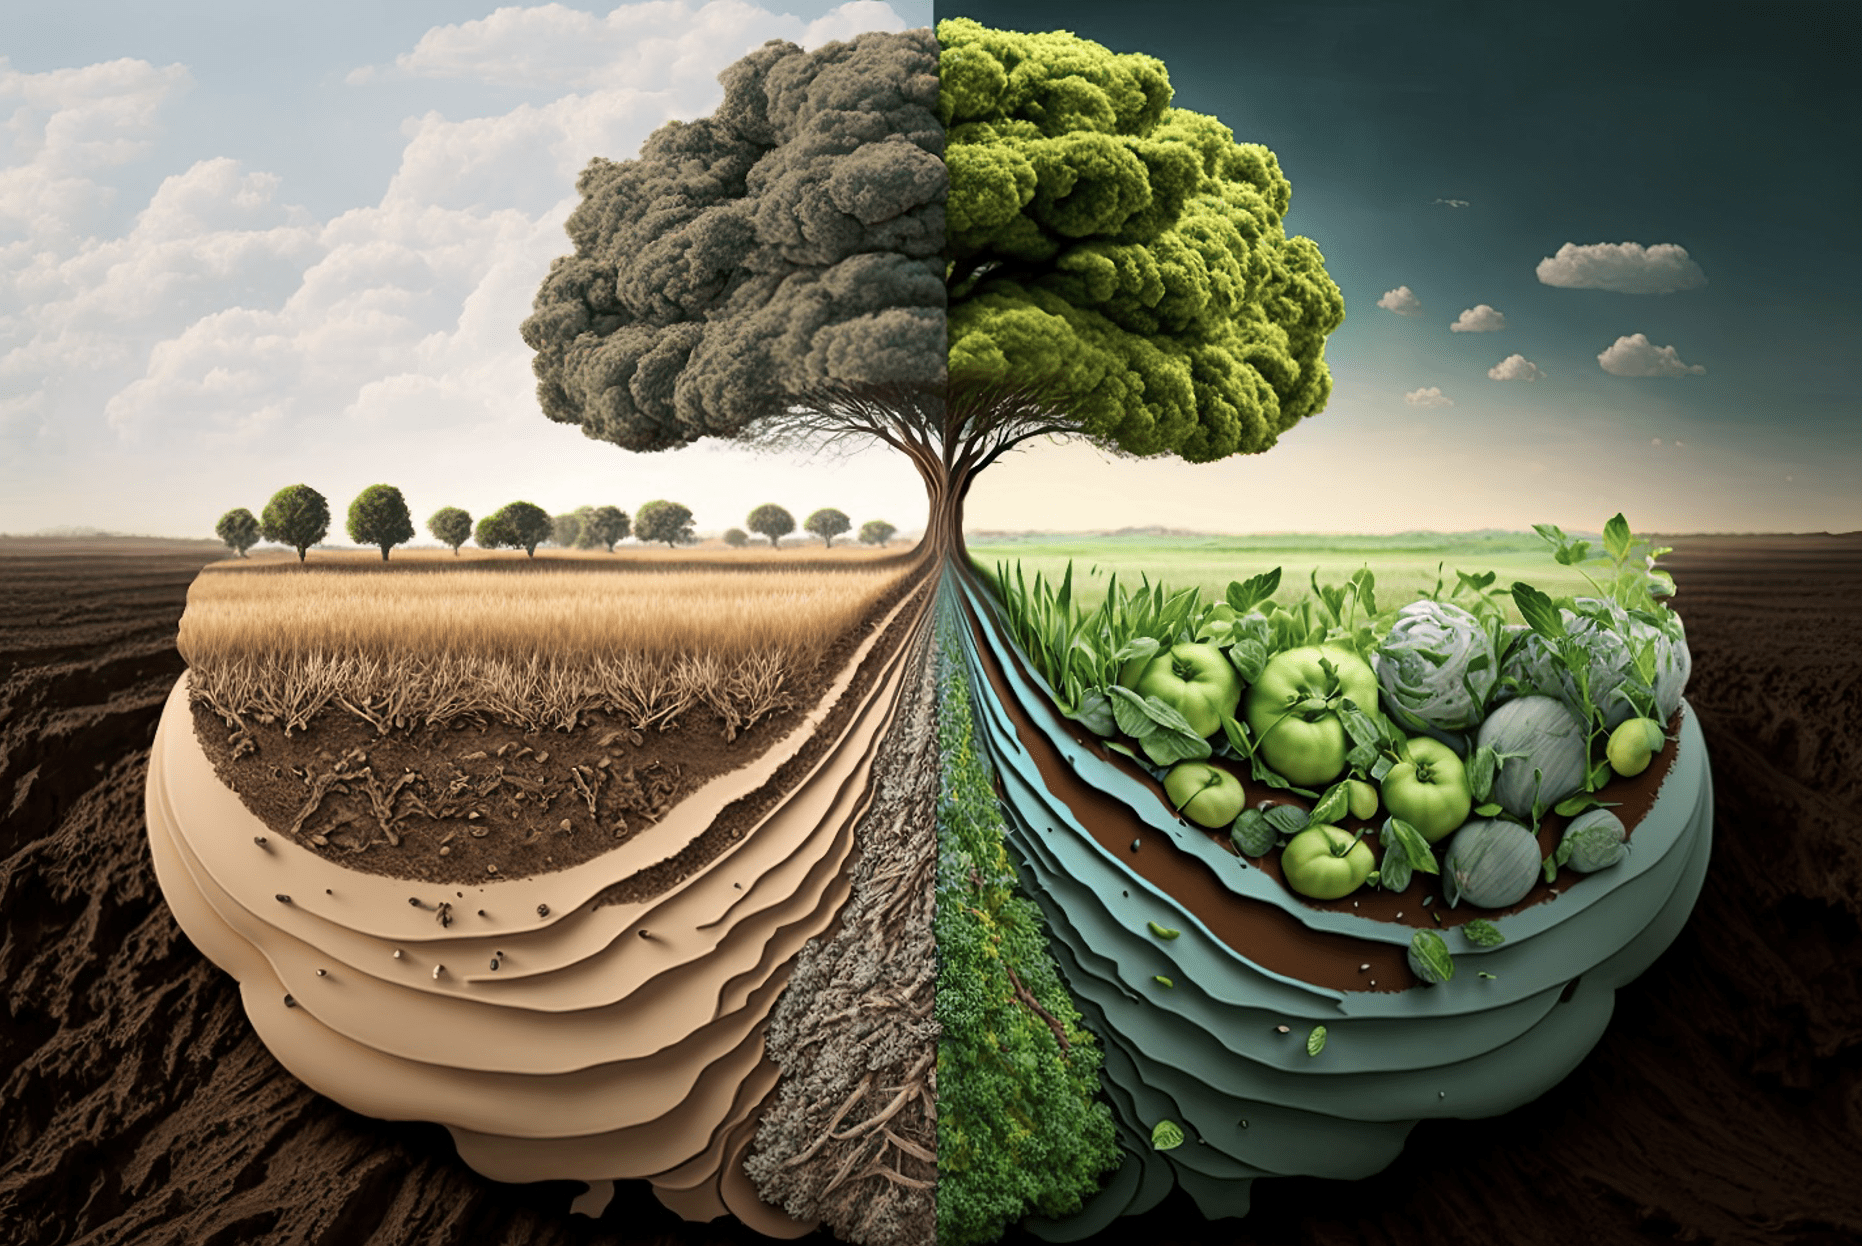 Bio-agriculture can help feed the world and reduce chemical use